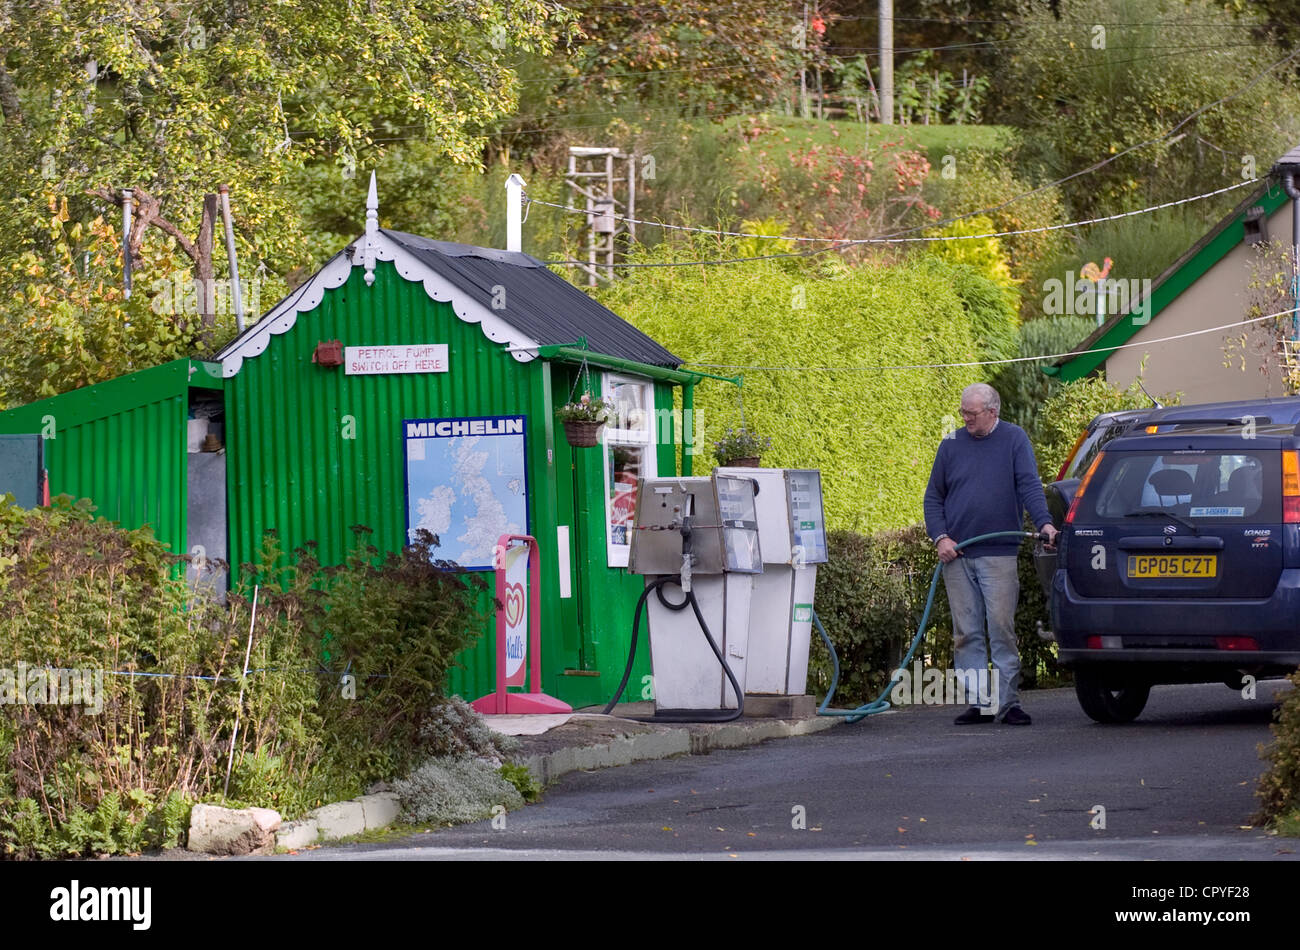 England. Photograph of the Vintage Clovelly Cross Filling Station in Devon